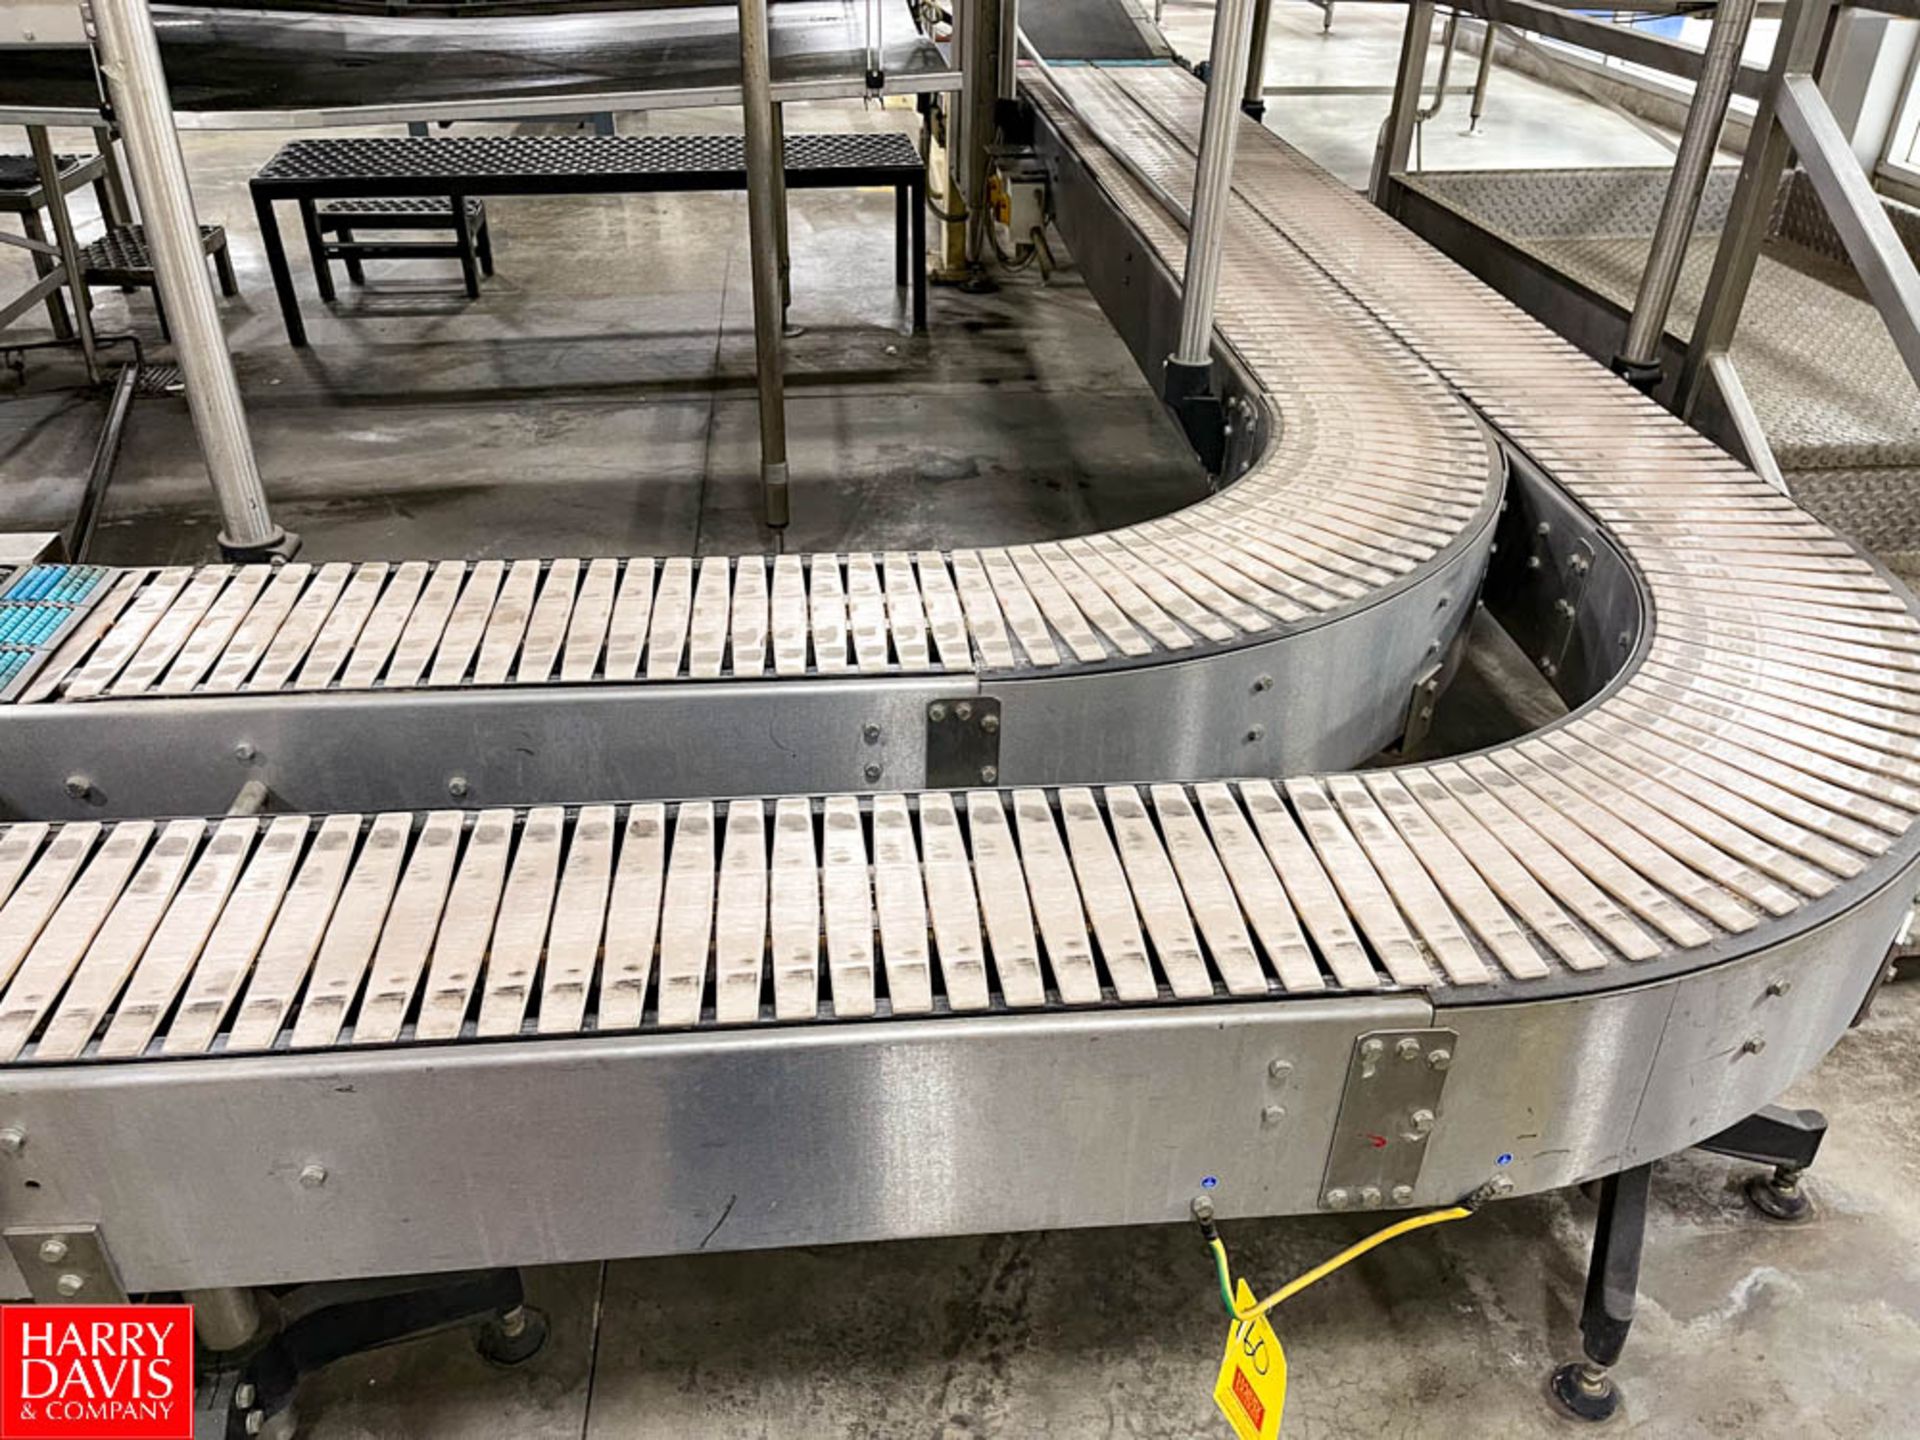 Over 22' S/S Dual Lane Conveyor with 90 Degree Turn Drive with 10"" Wide Plastic Table Top